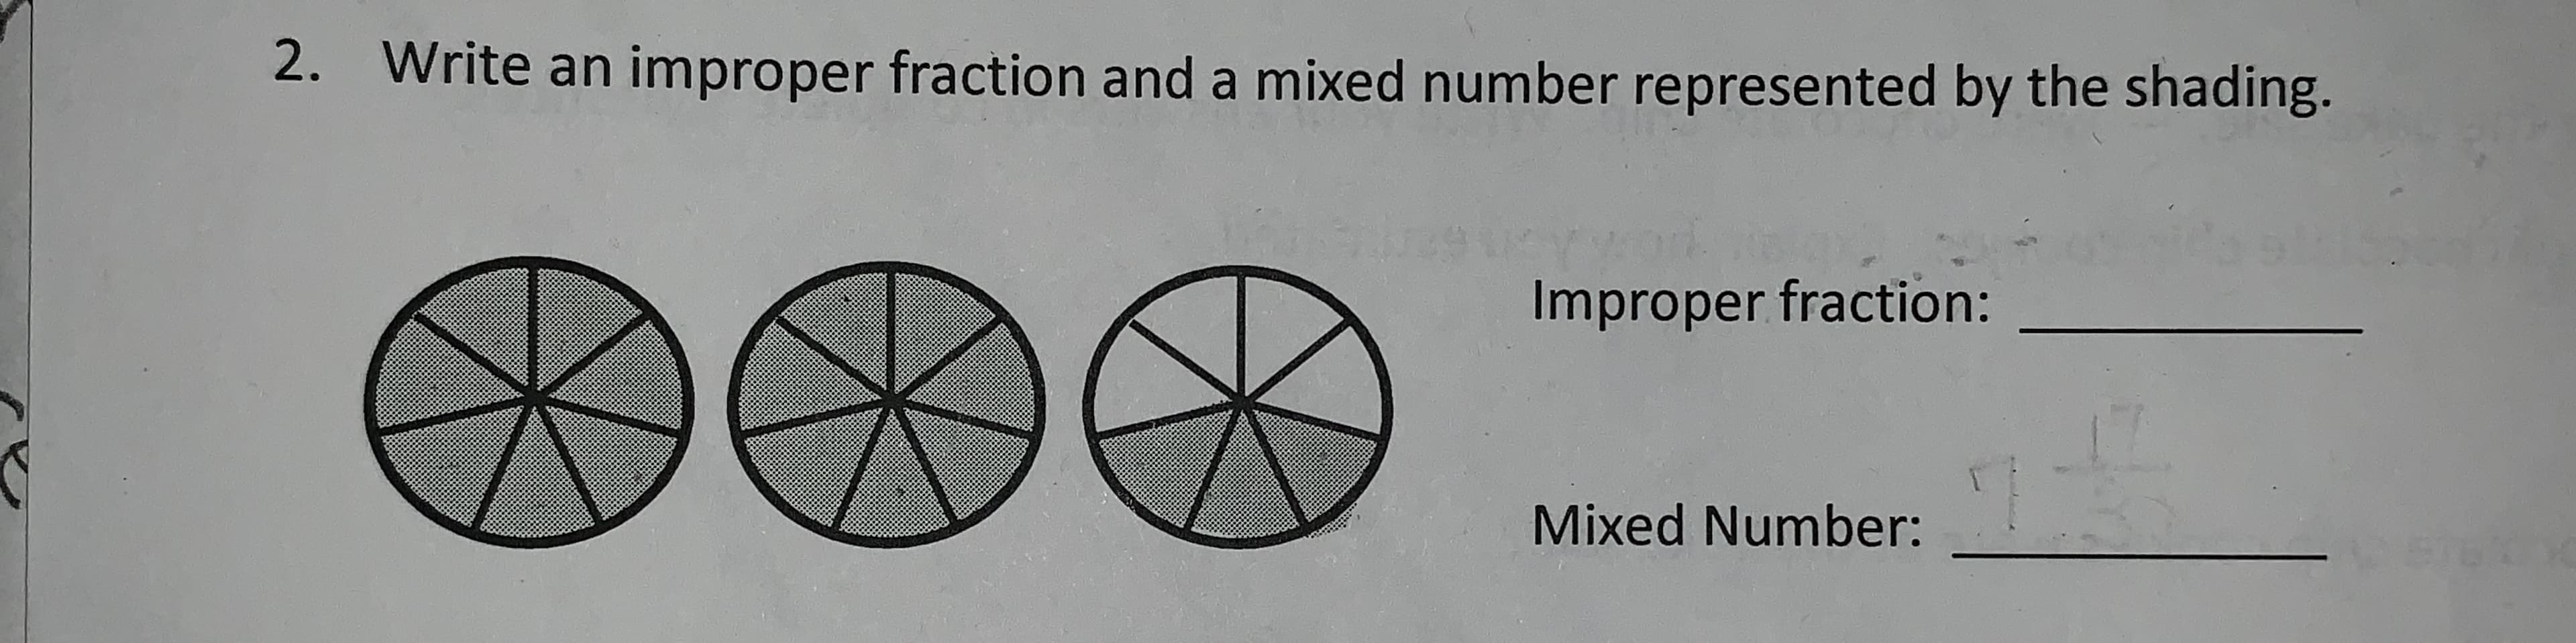 2.
Write an improper fraction and a mixed number represented by the shading.
Improper fraction:
Mixed Number:
